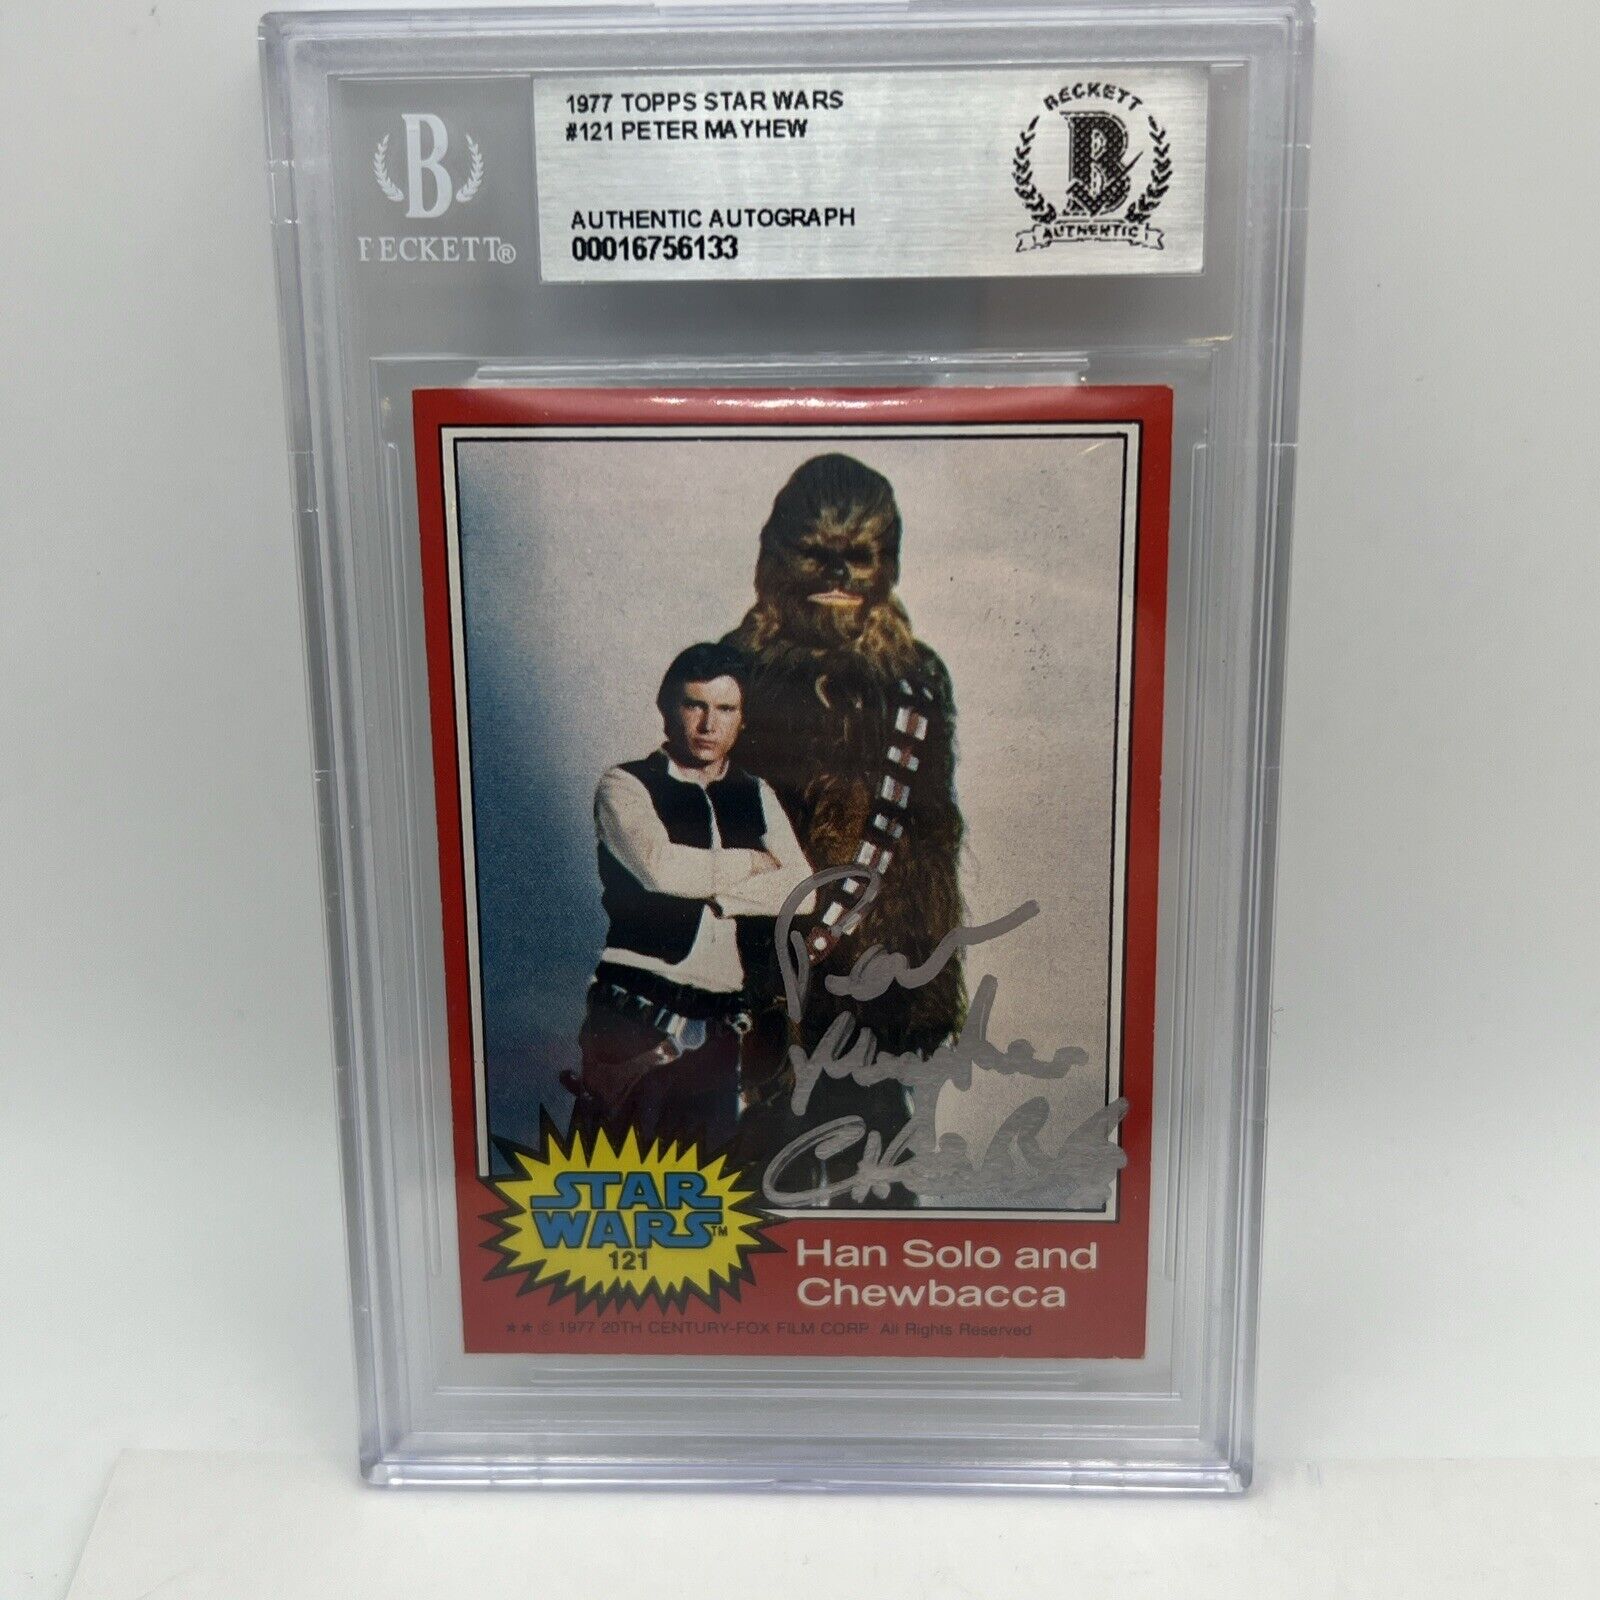 PETER MAYHEW CHEWBACCA SIGNED TOPPS 1977 STAR WARS RED CARD #121 BECKETT AUTH.